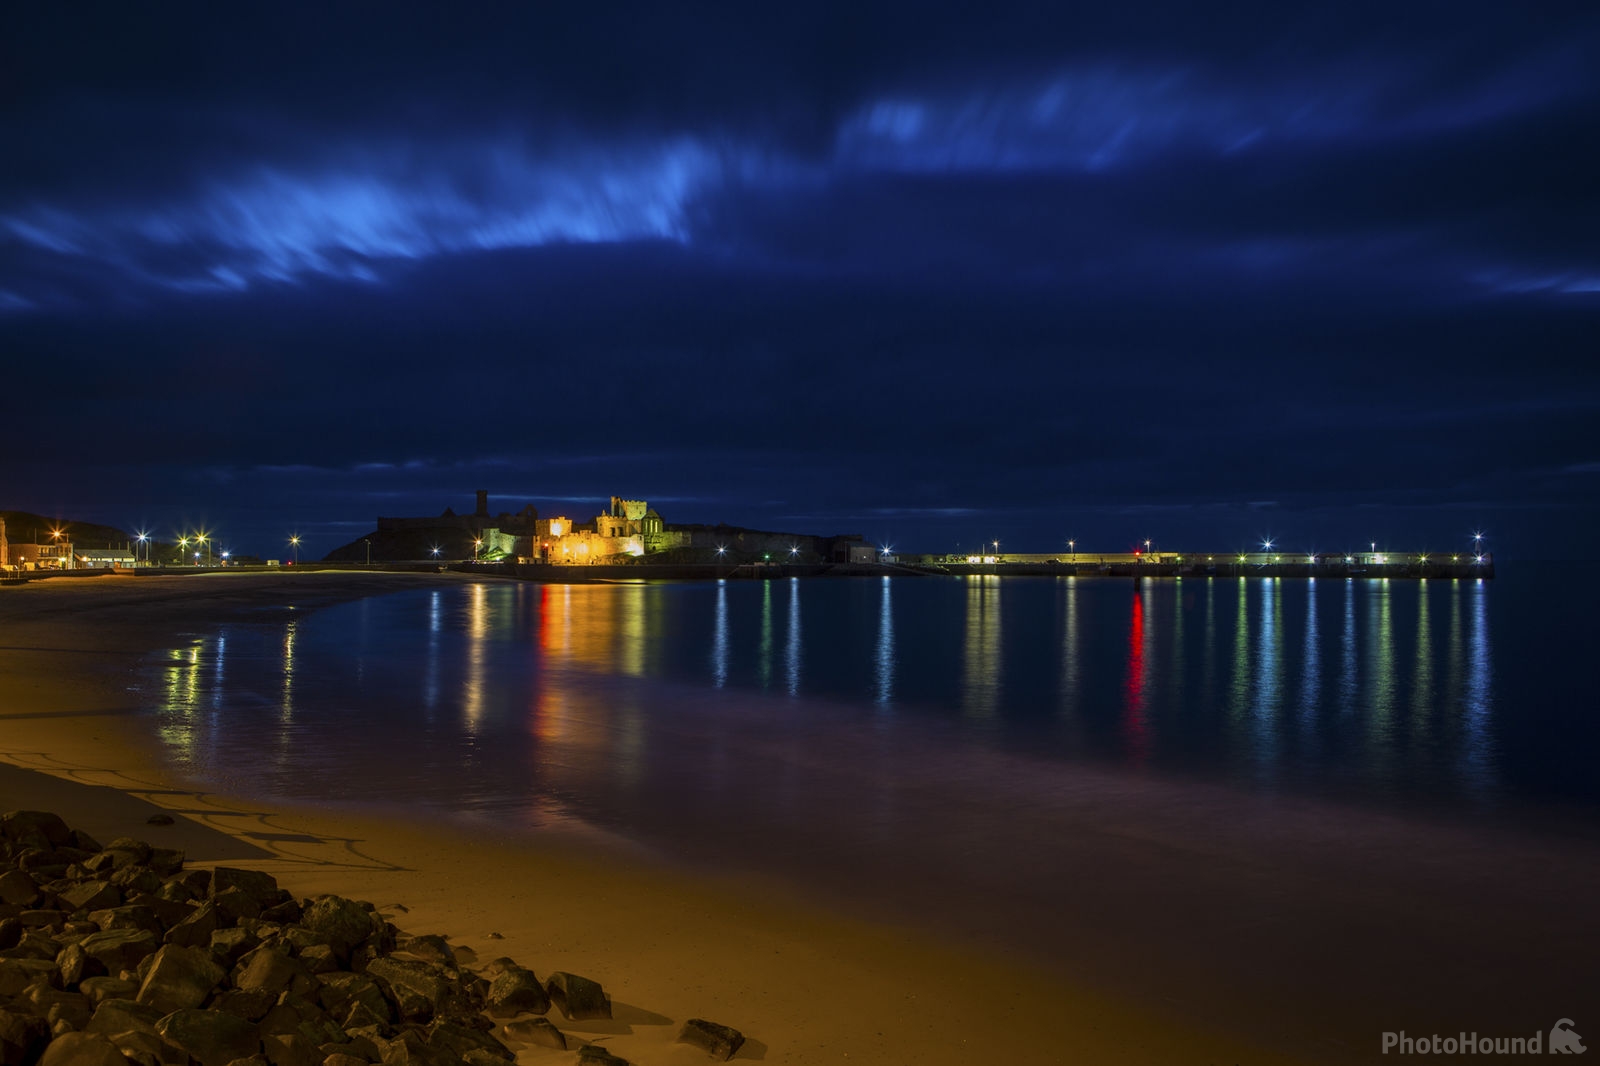 Image of Peel Castle by David Silvester